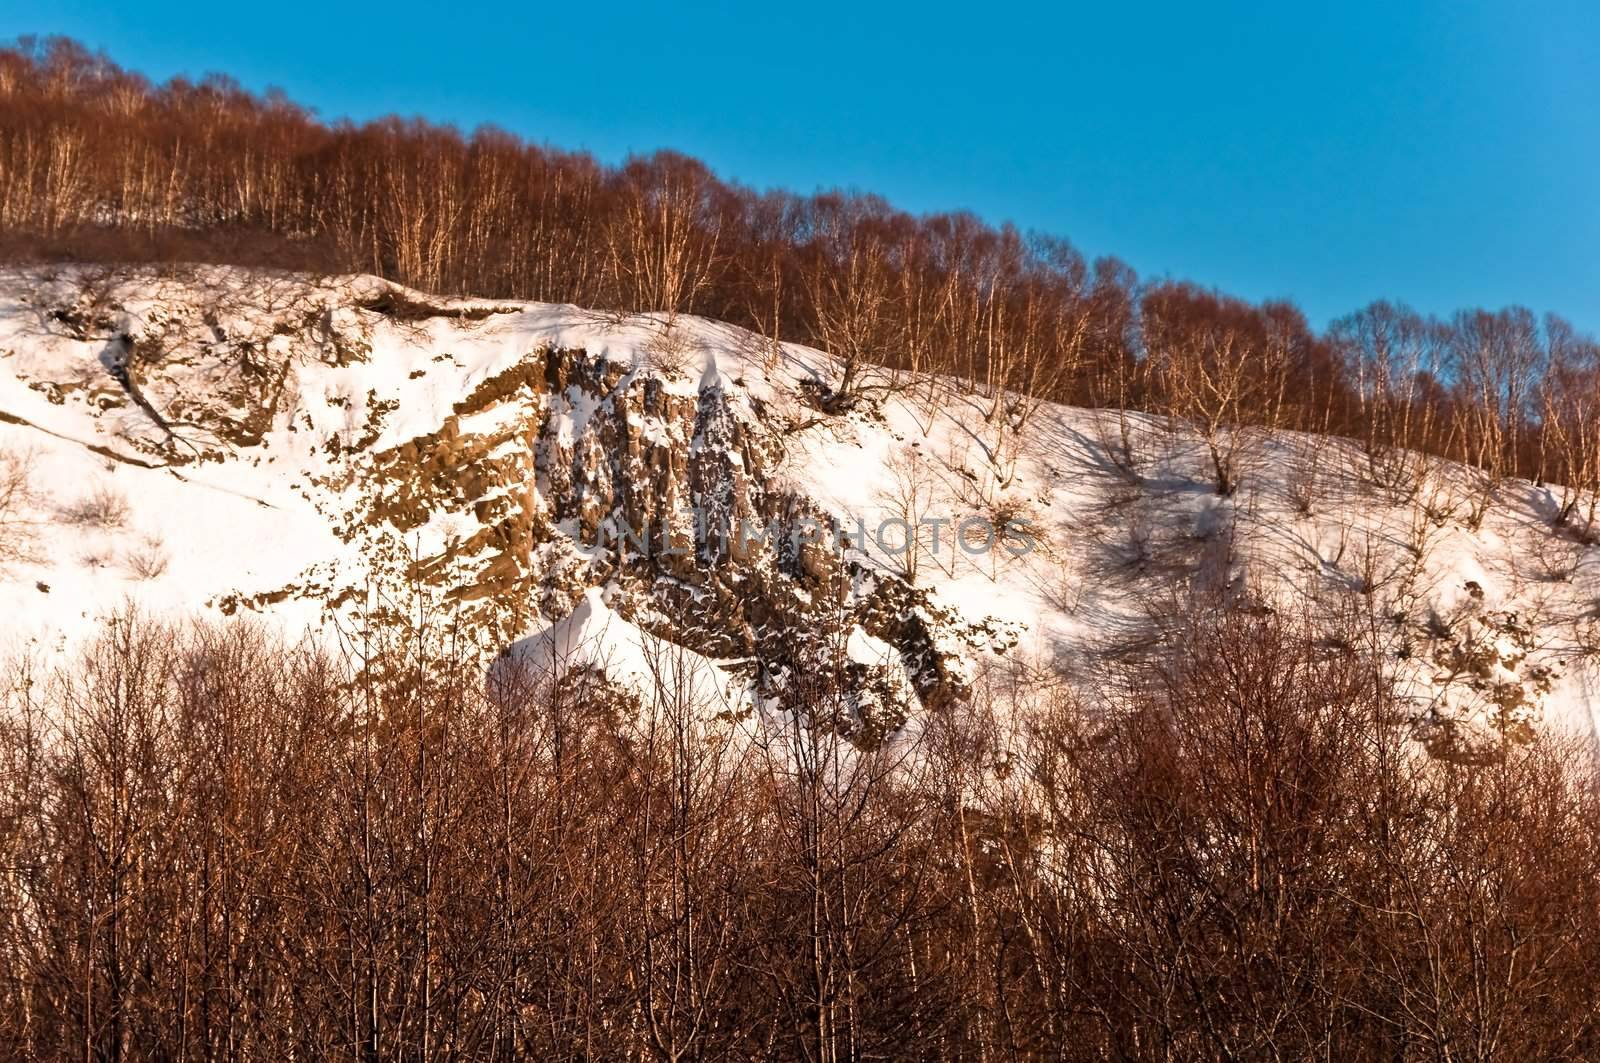 Hill in snow by alena0509